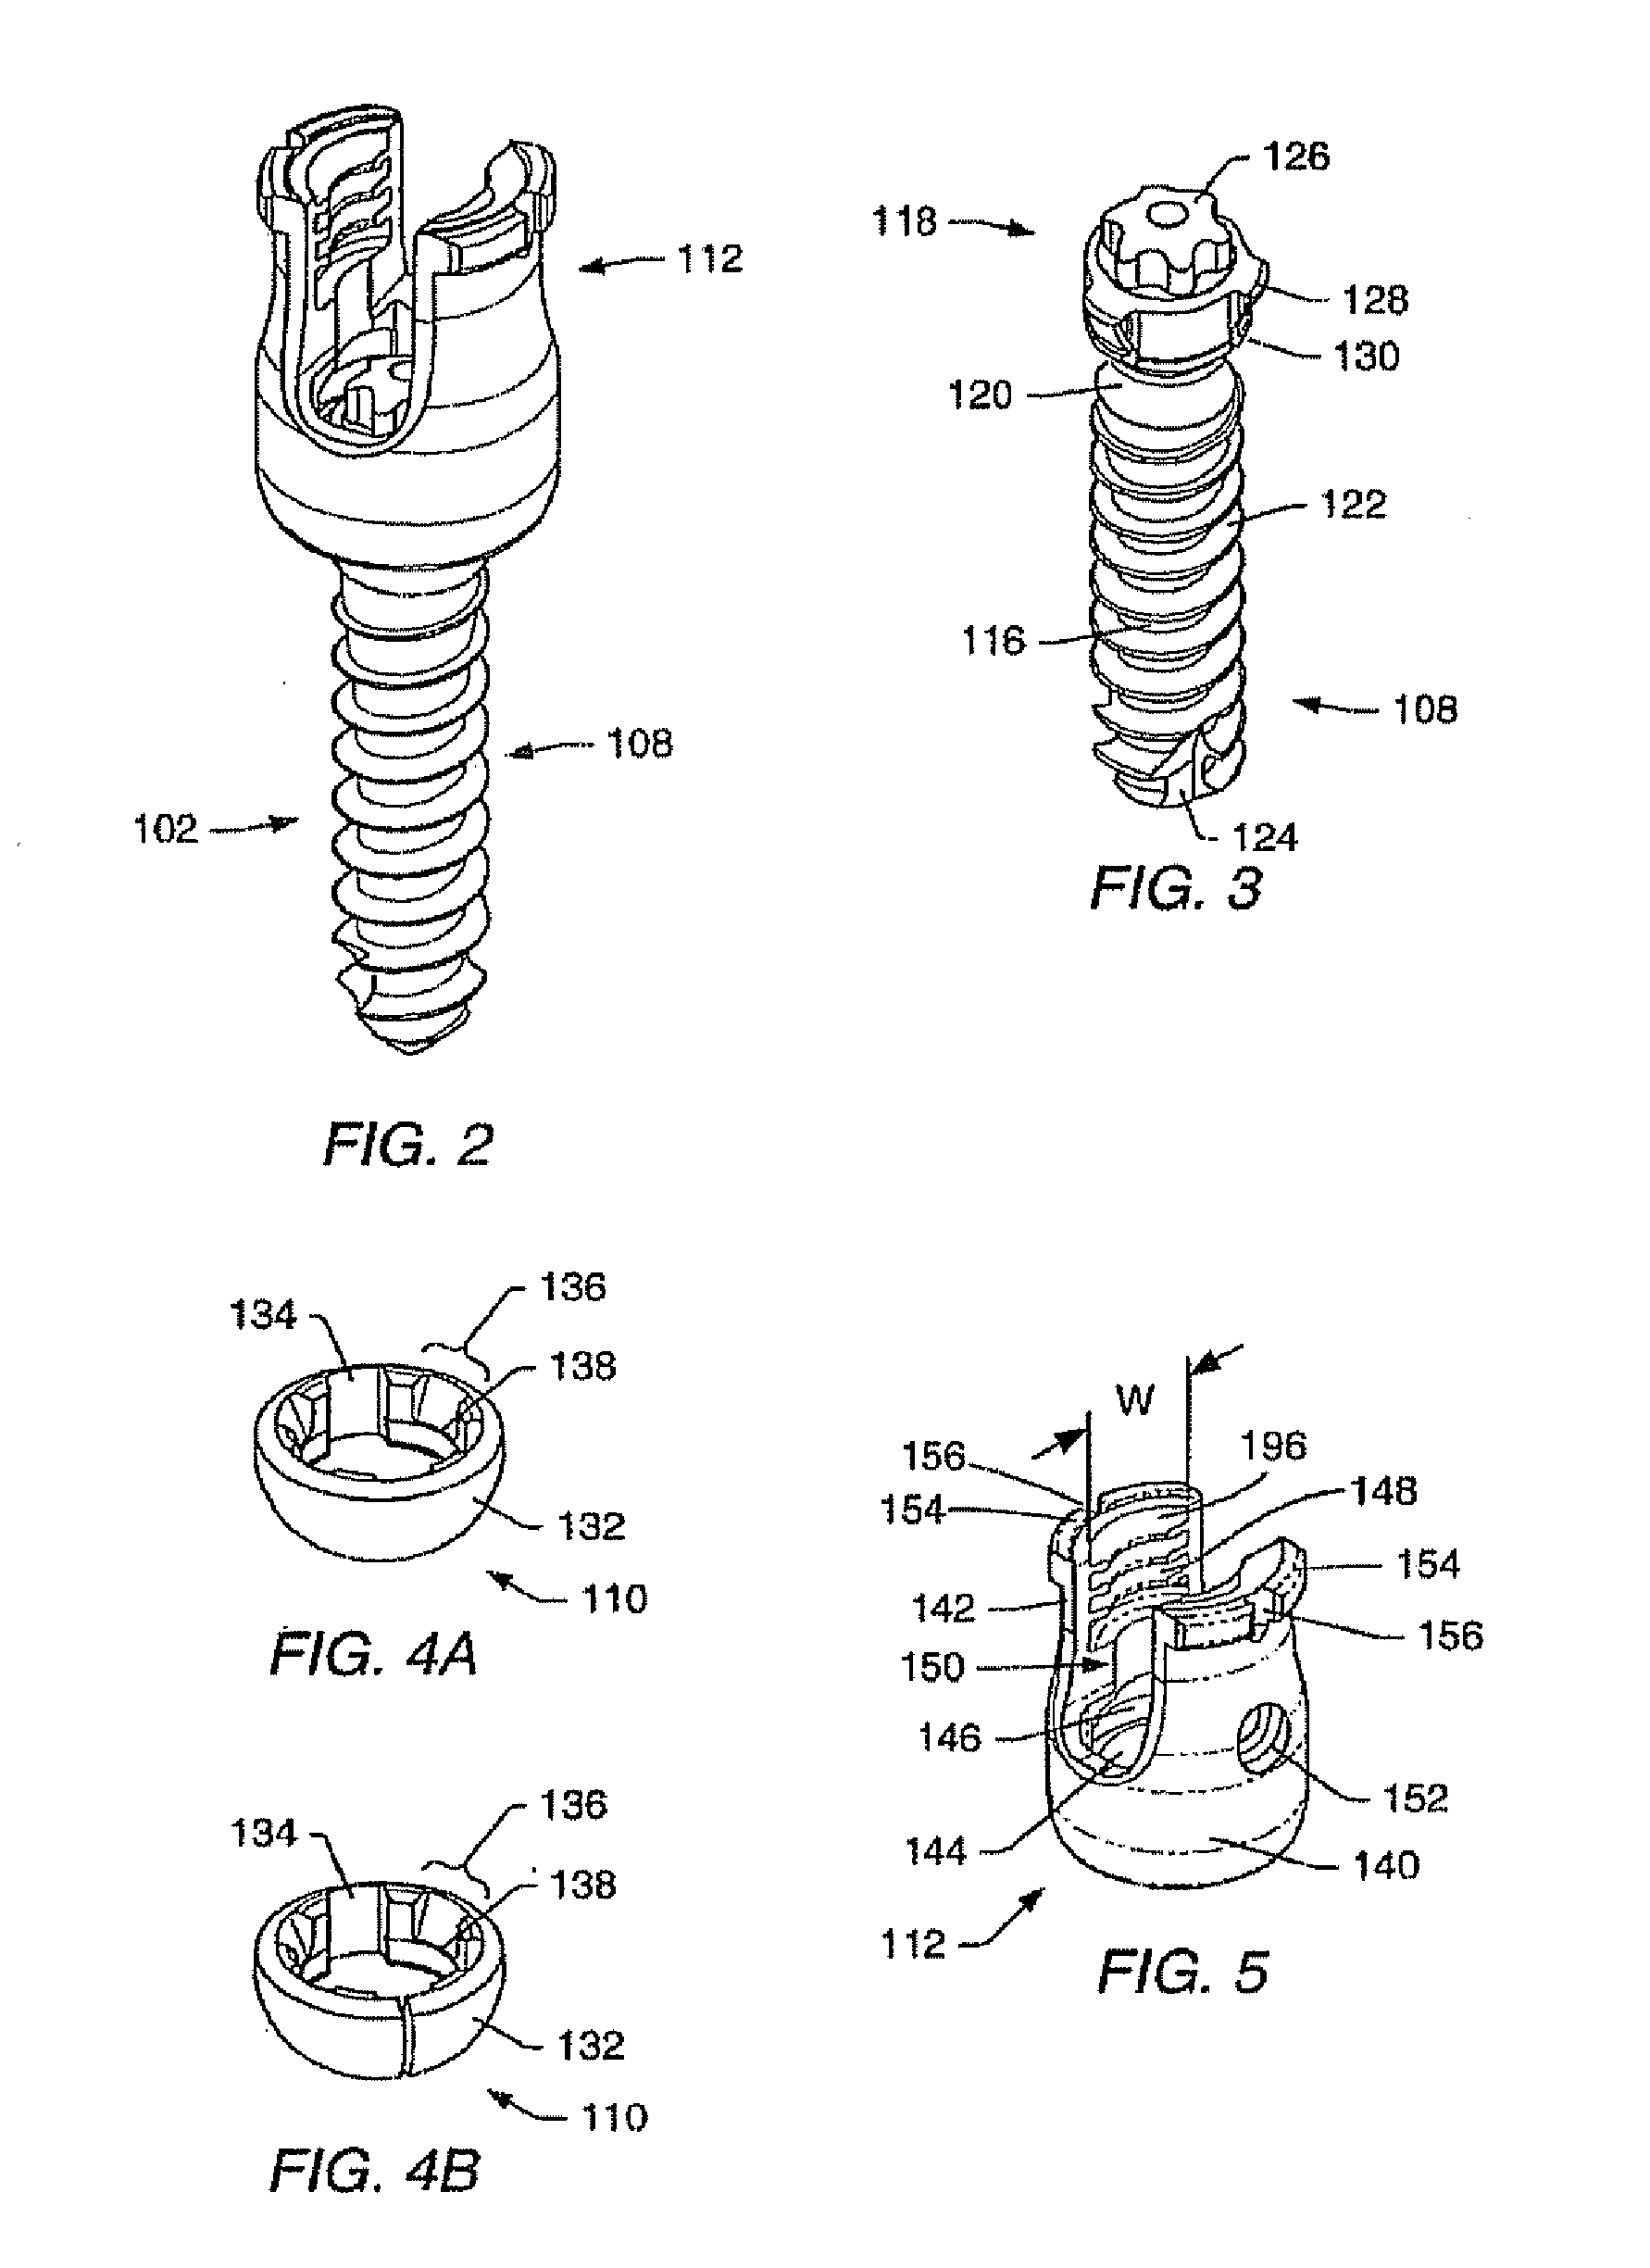 Device and system for implanting polyaxial bone fasteners